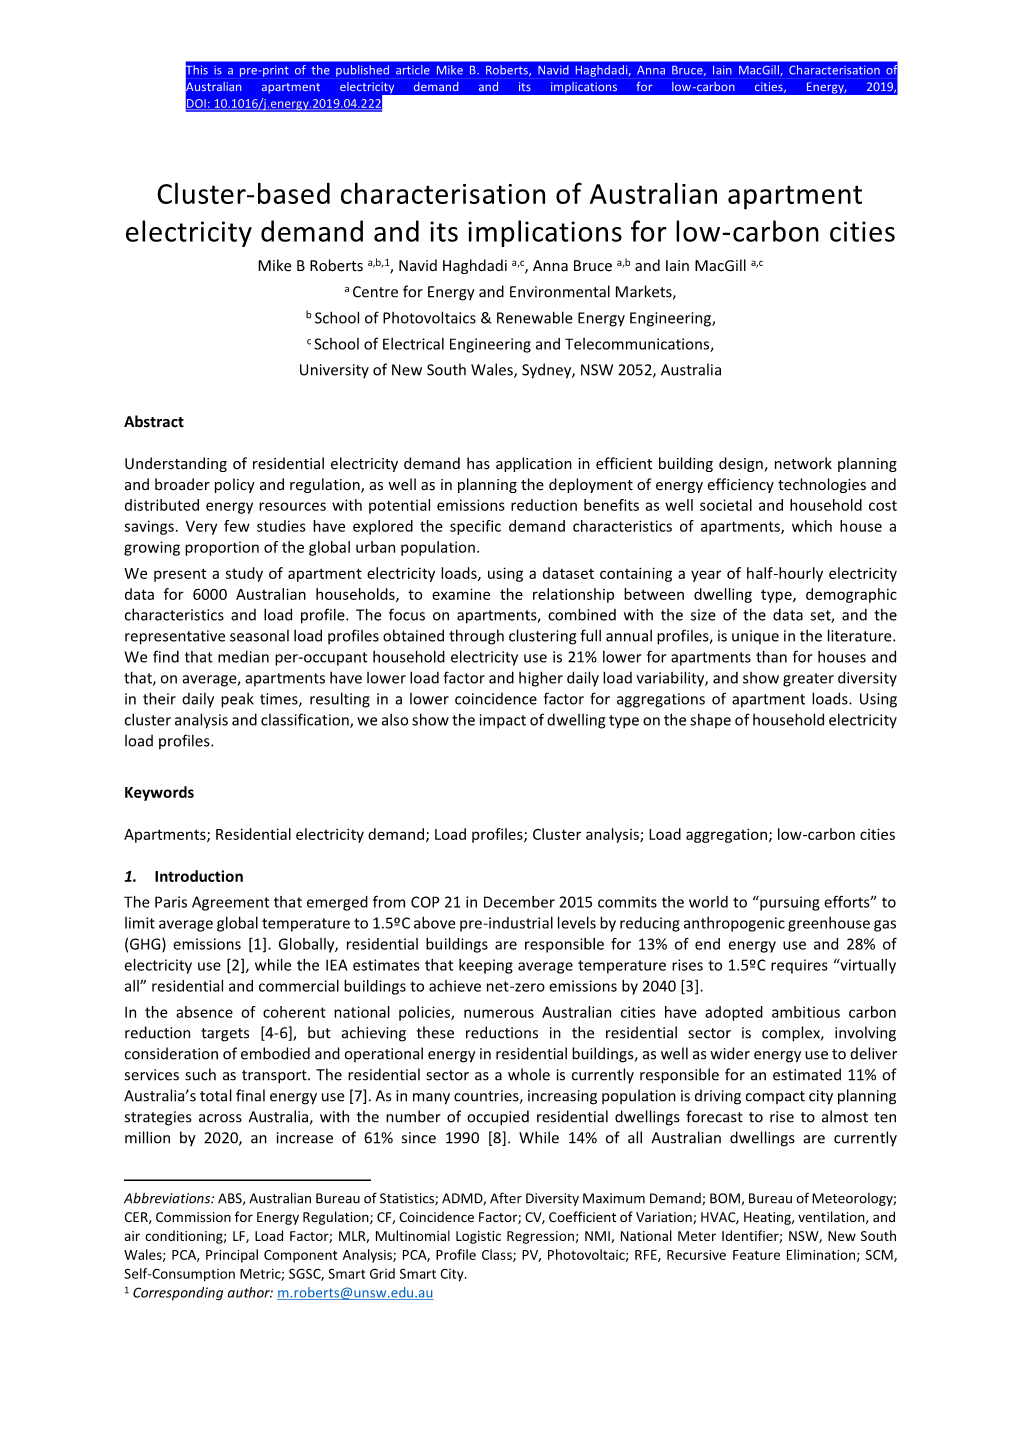 Cluster-Based Characterisation of Australian Apartment Electricity